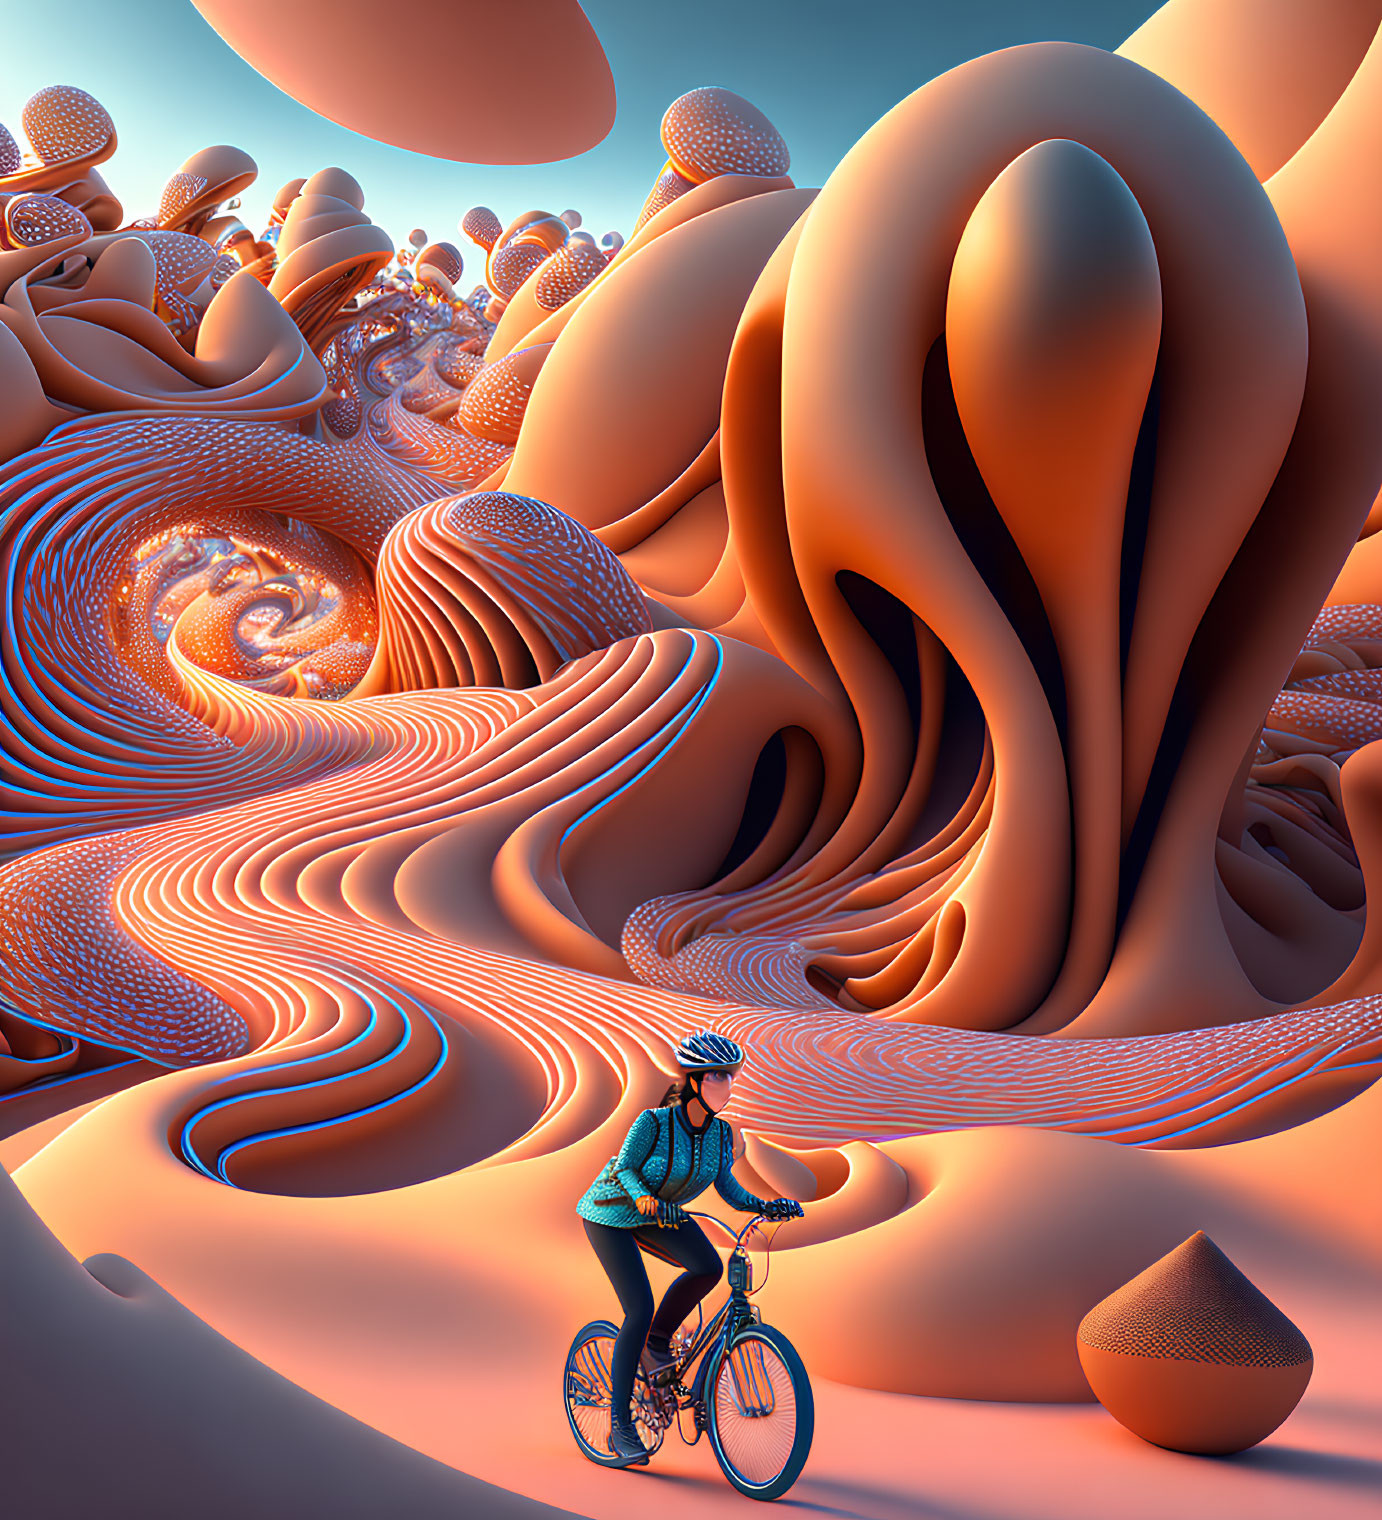 Cyclist on surreal orange landscape with swirling patterns